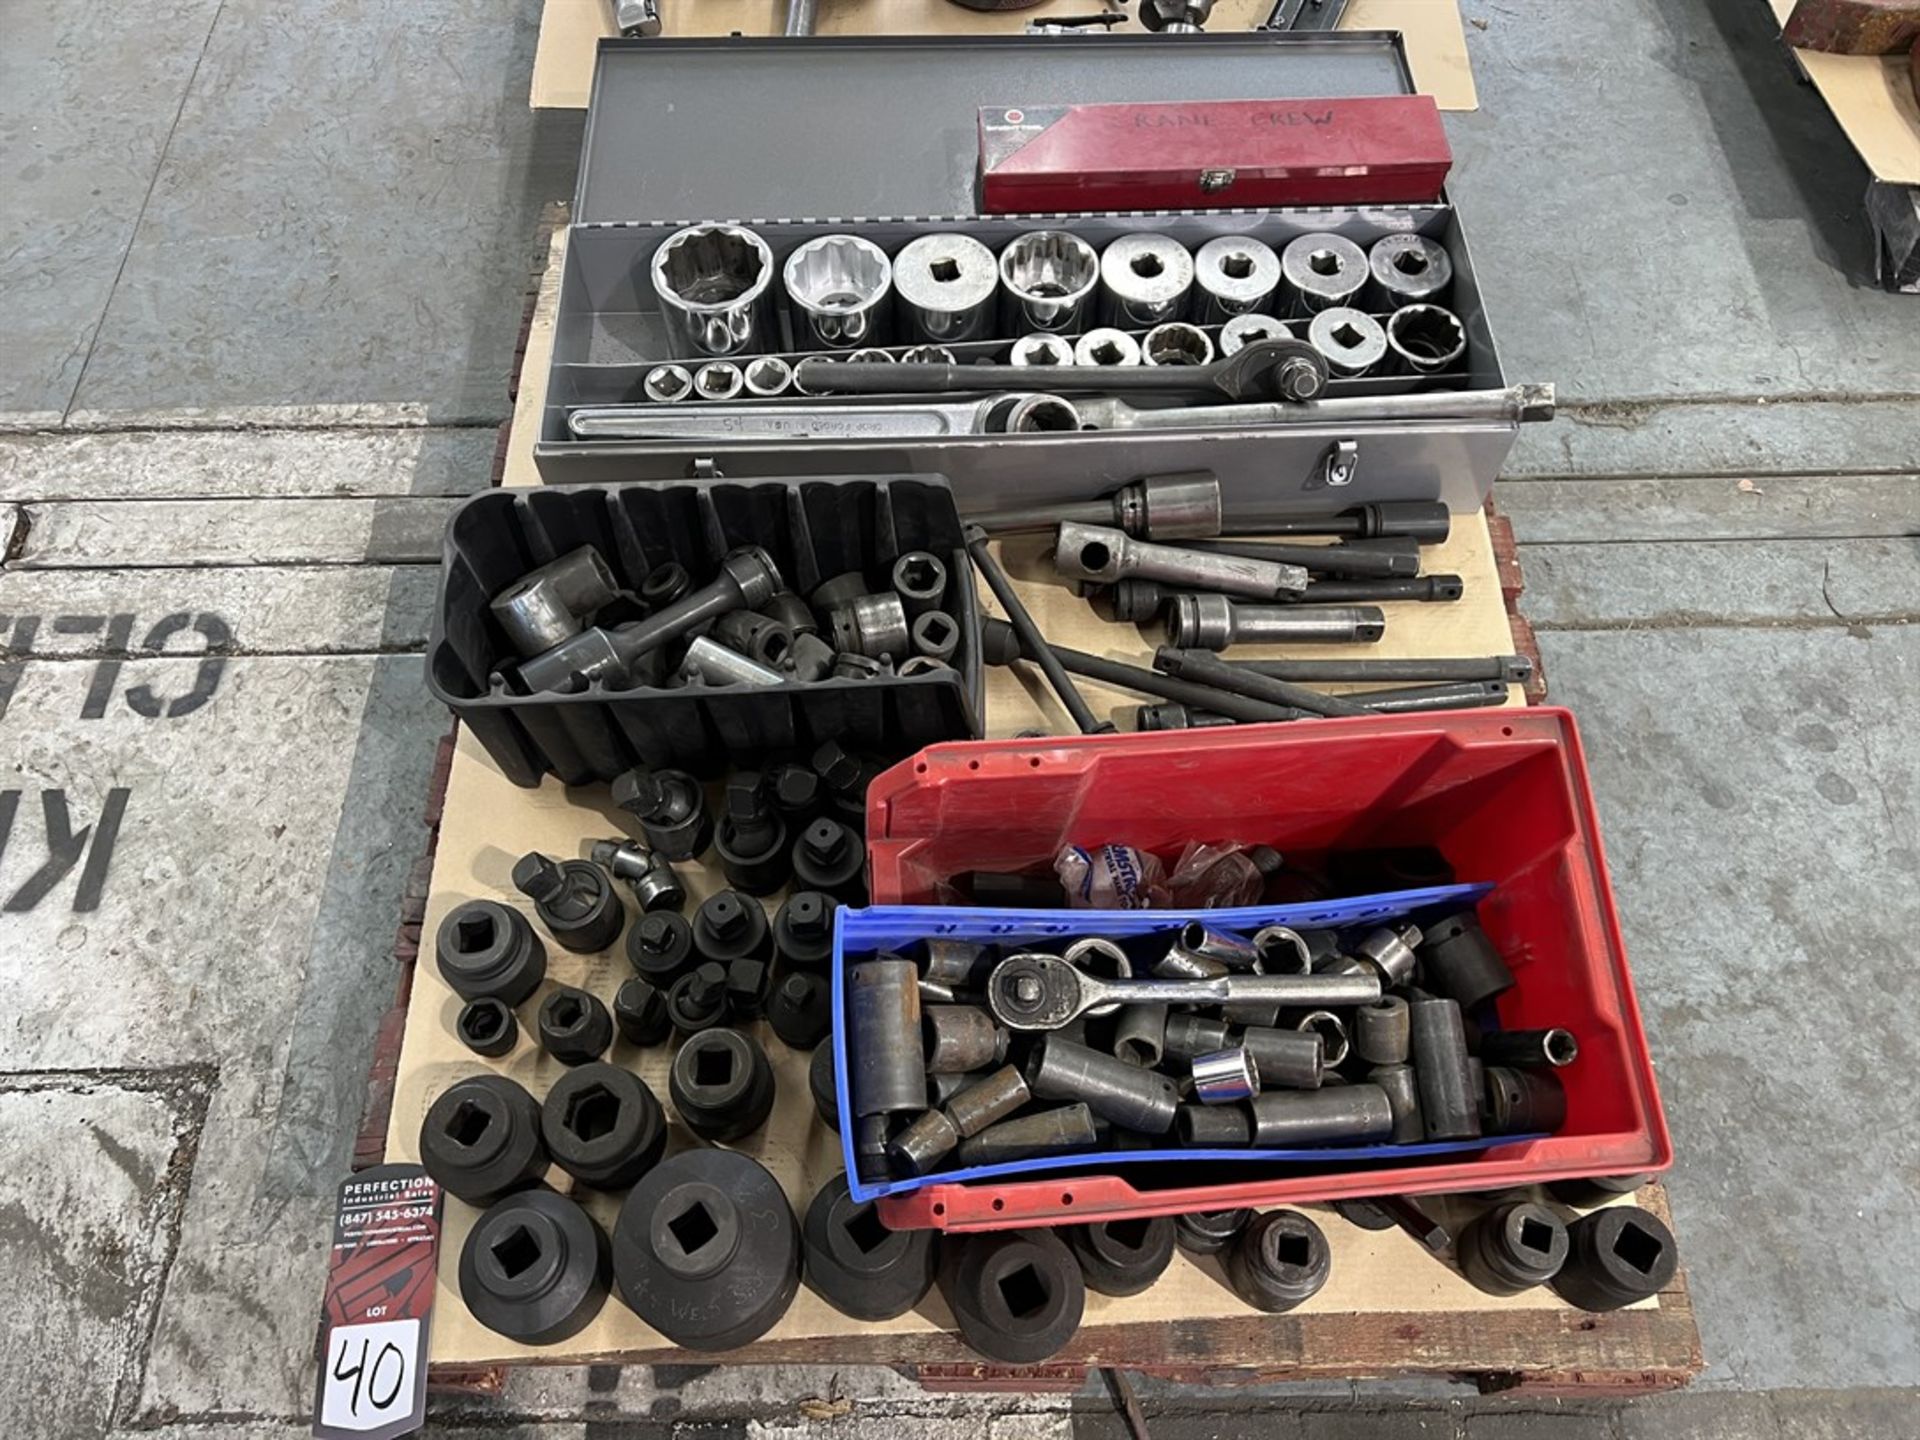 Pallet Comprising Assorted Sockets and Ratchets, 1/2", 3/4", and 1" Drive (Building 44)